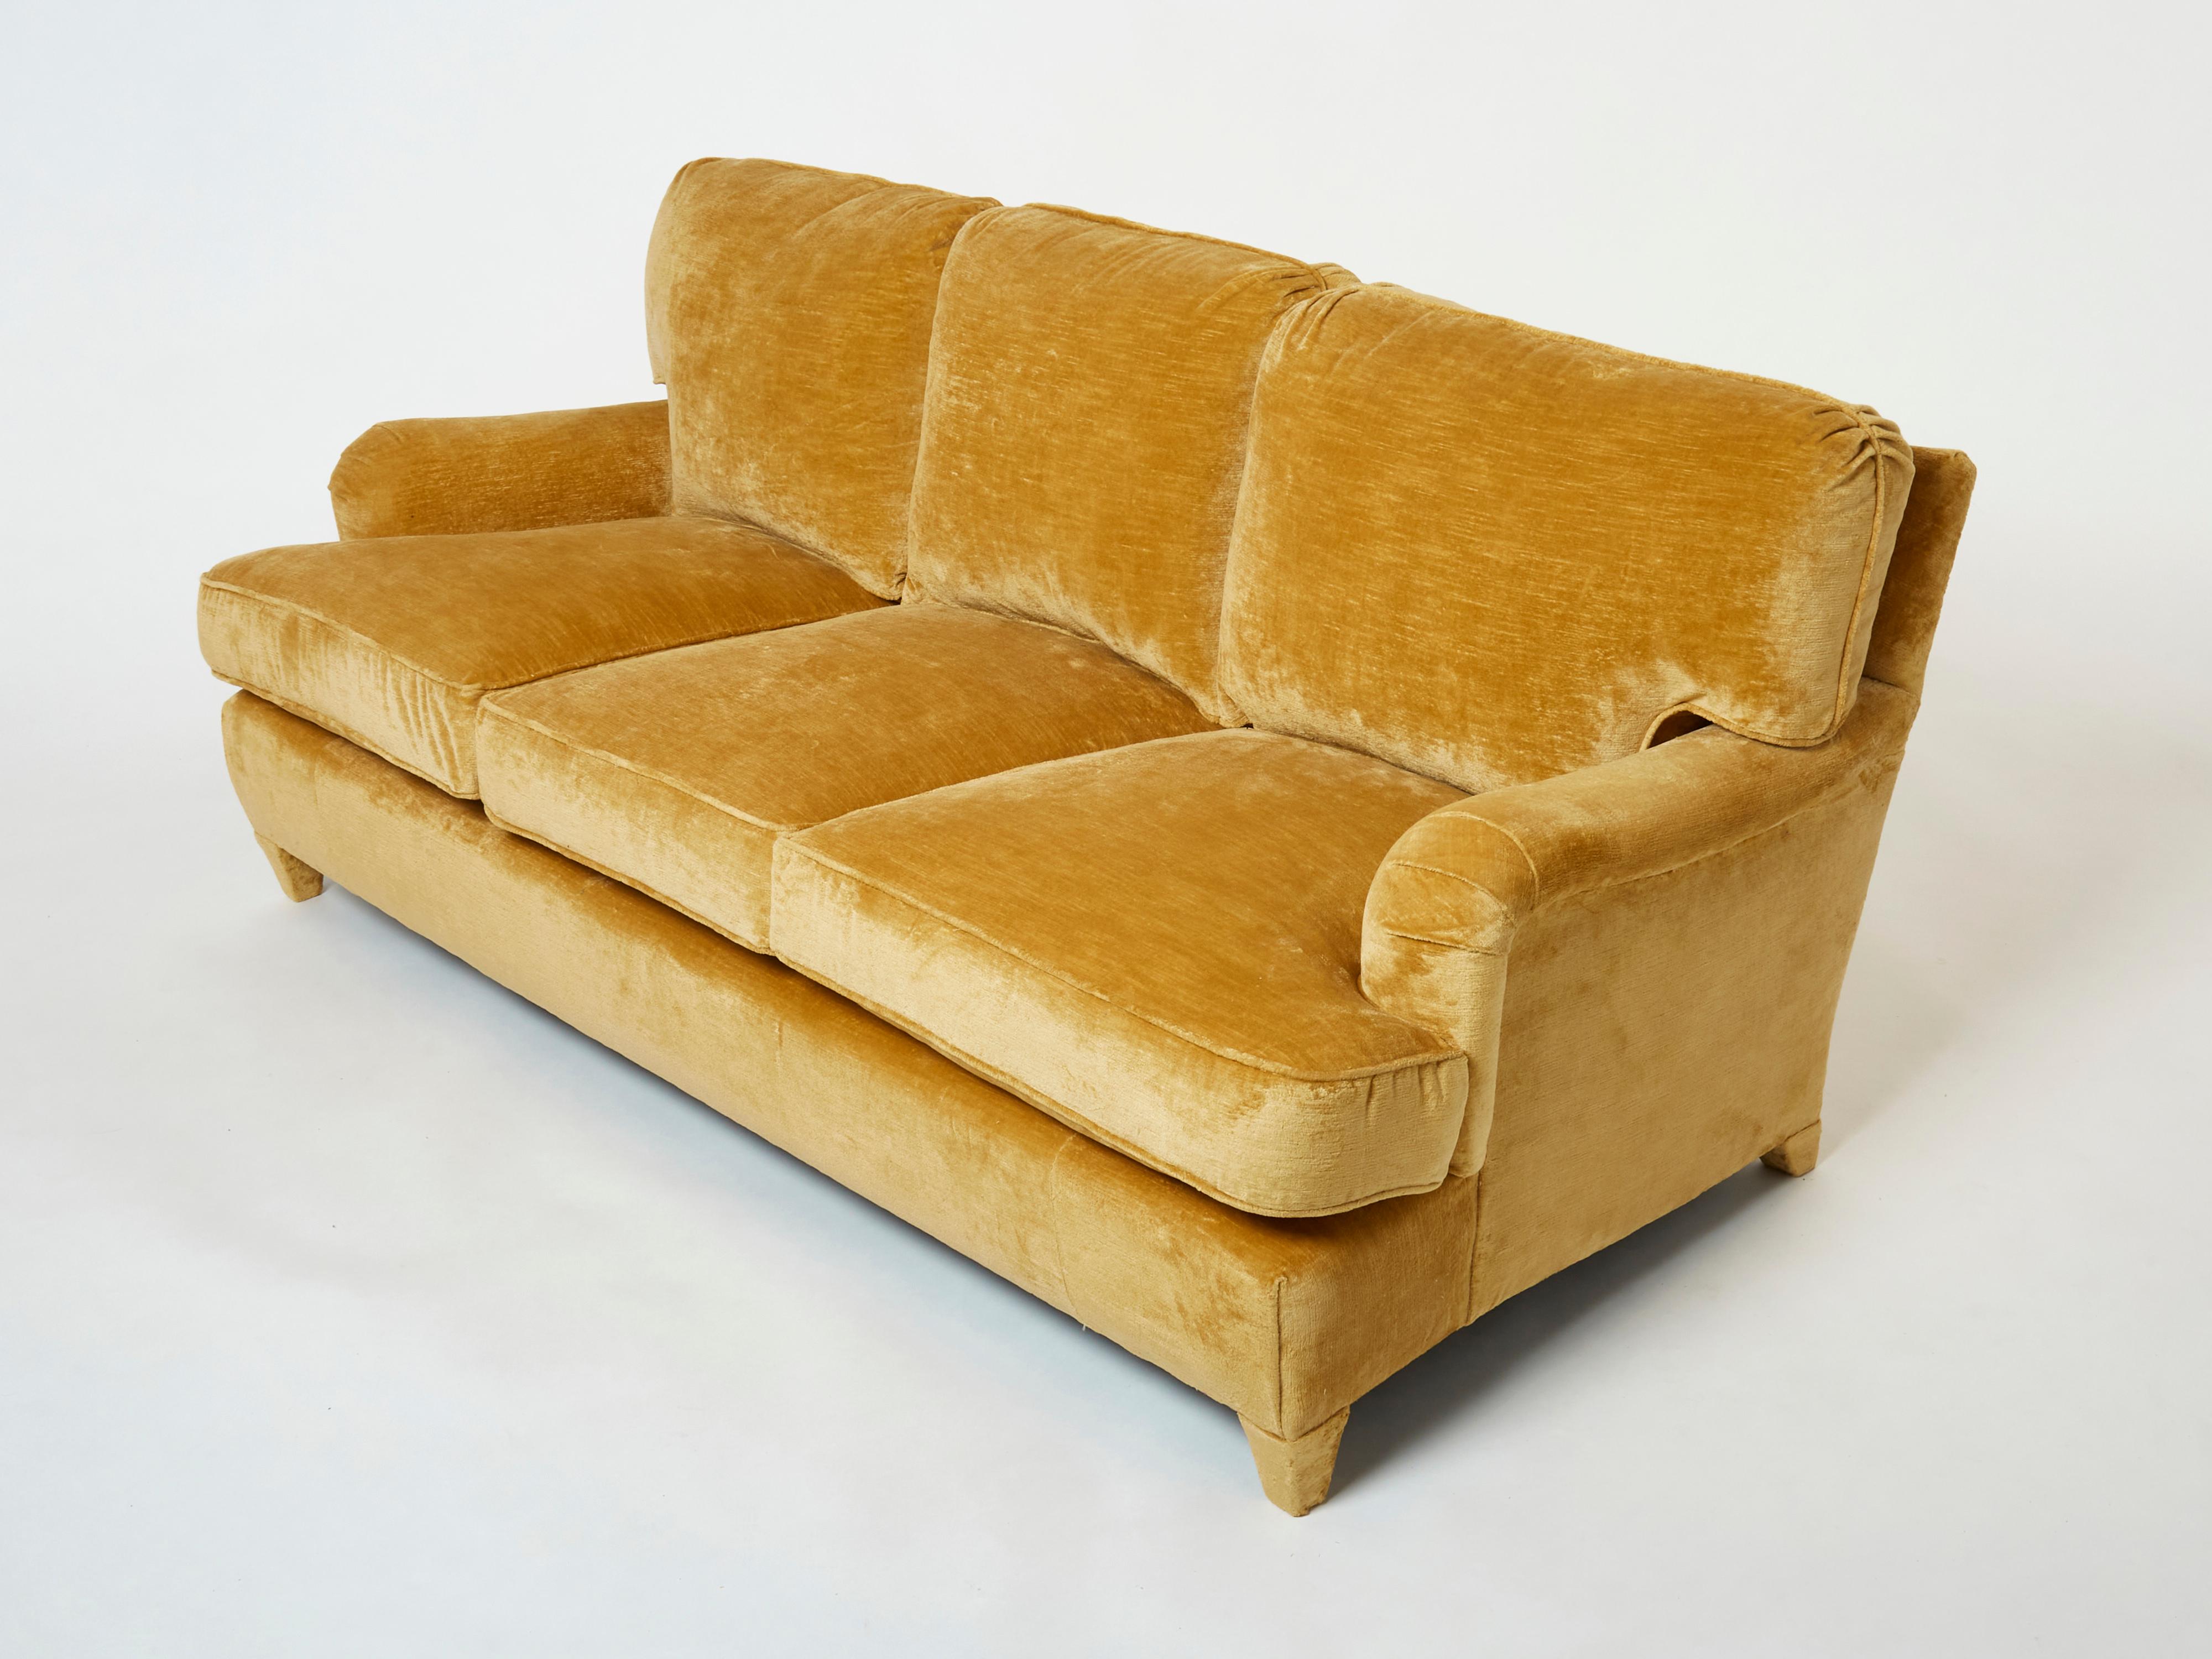 This beautiful sofa by Jean-Michel Frank, designed and produced in the mid 1930s, has been newly reupholstered with a mustard yellow linen velvet  fabric by Pierre Frey, reference Georges, made of cotton and linen. It has been fully restored,